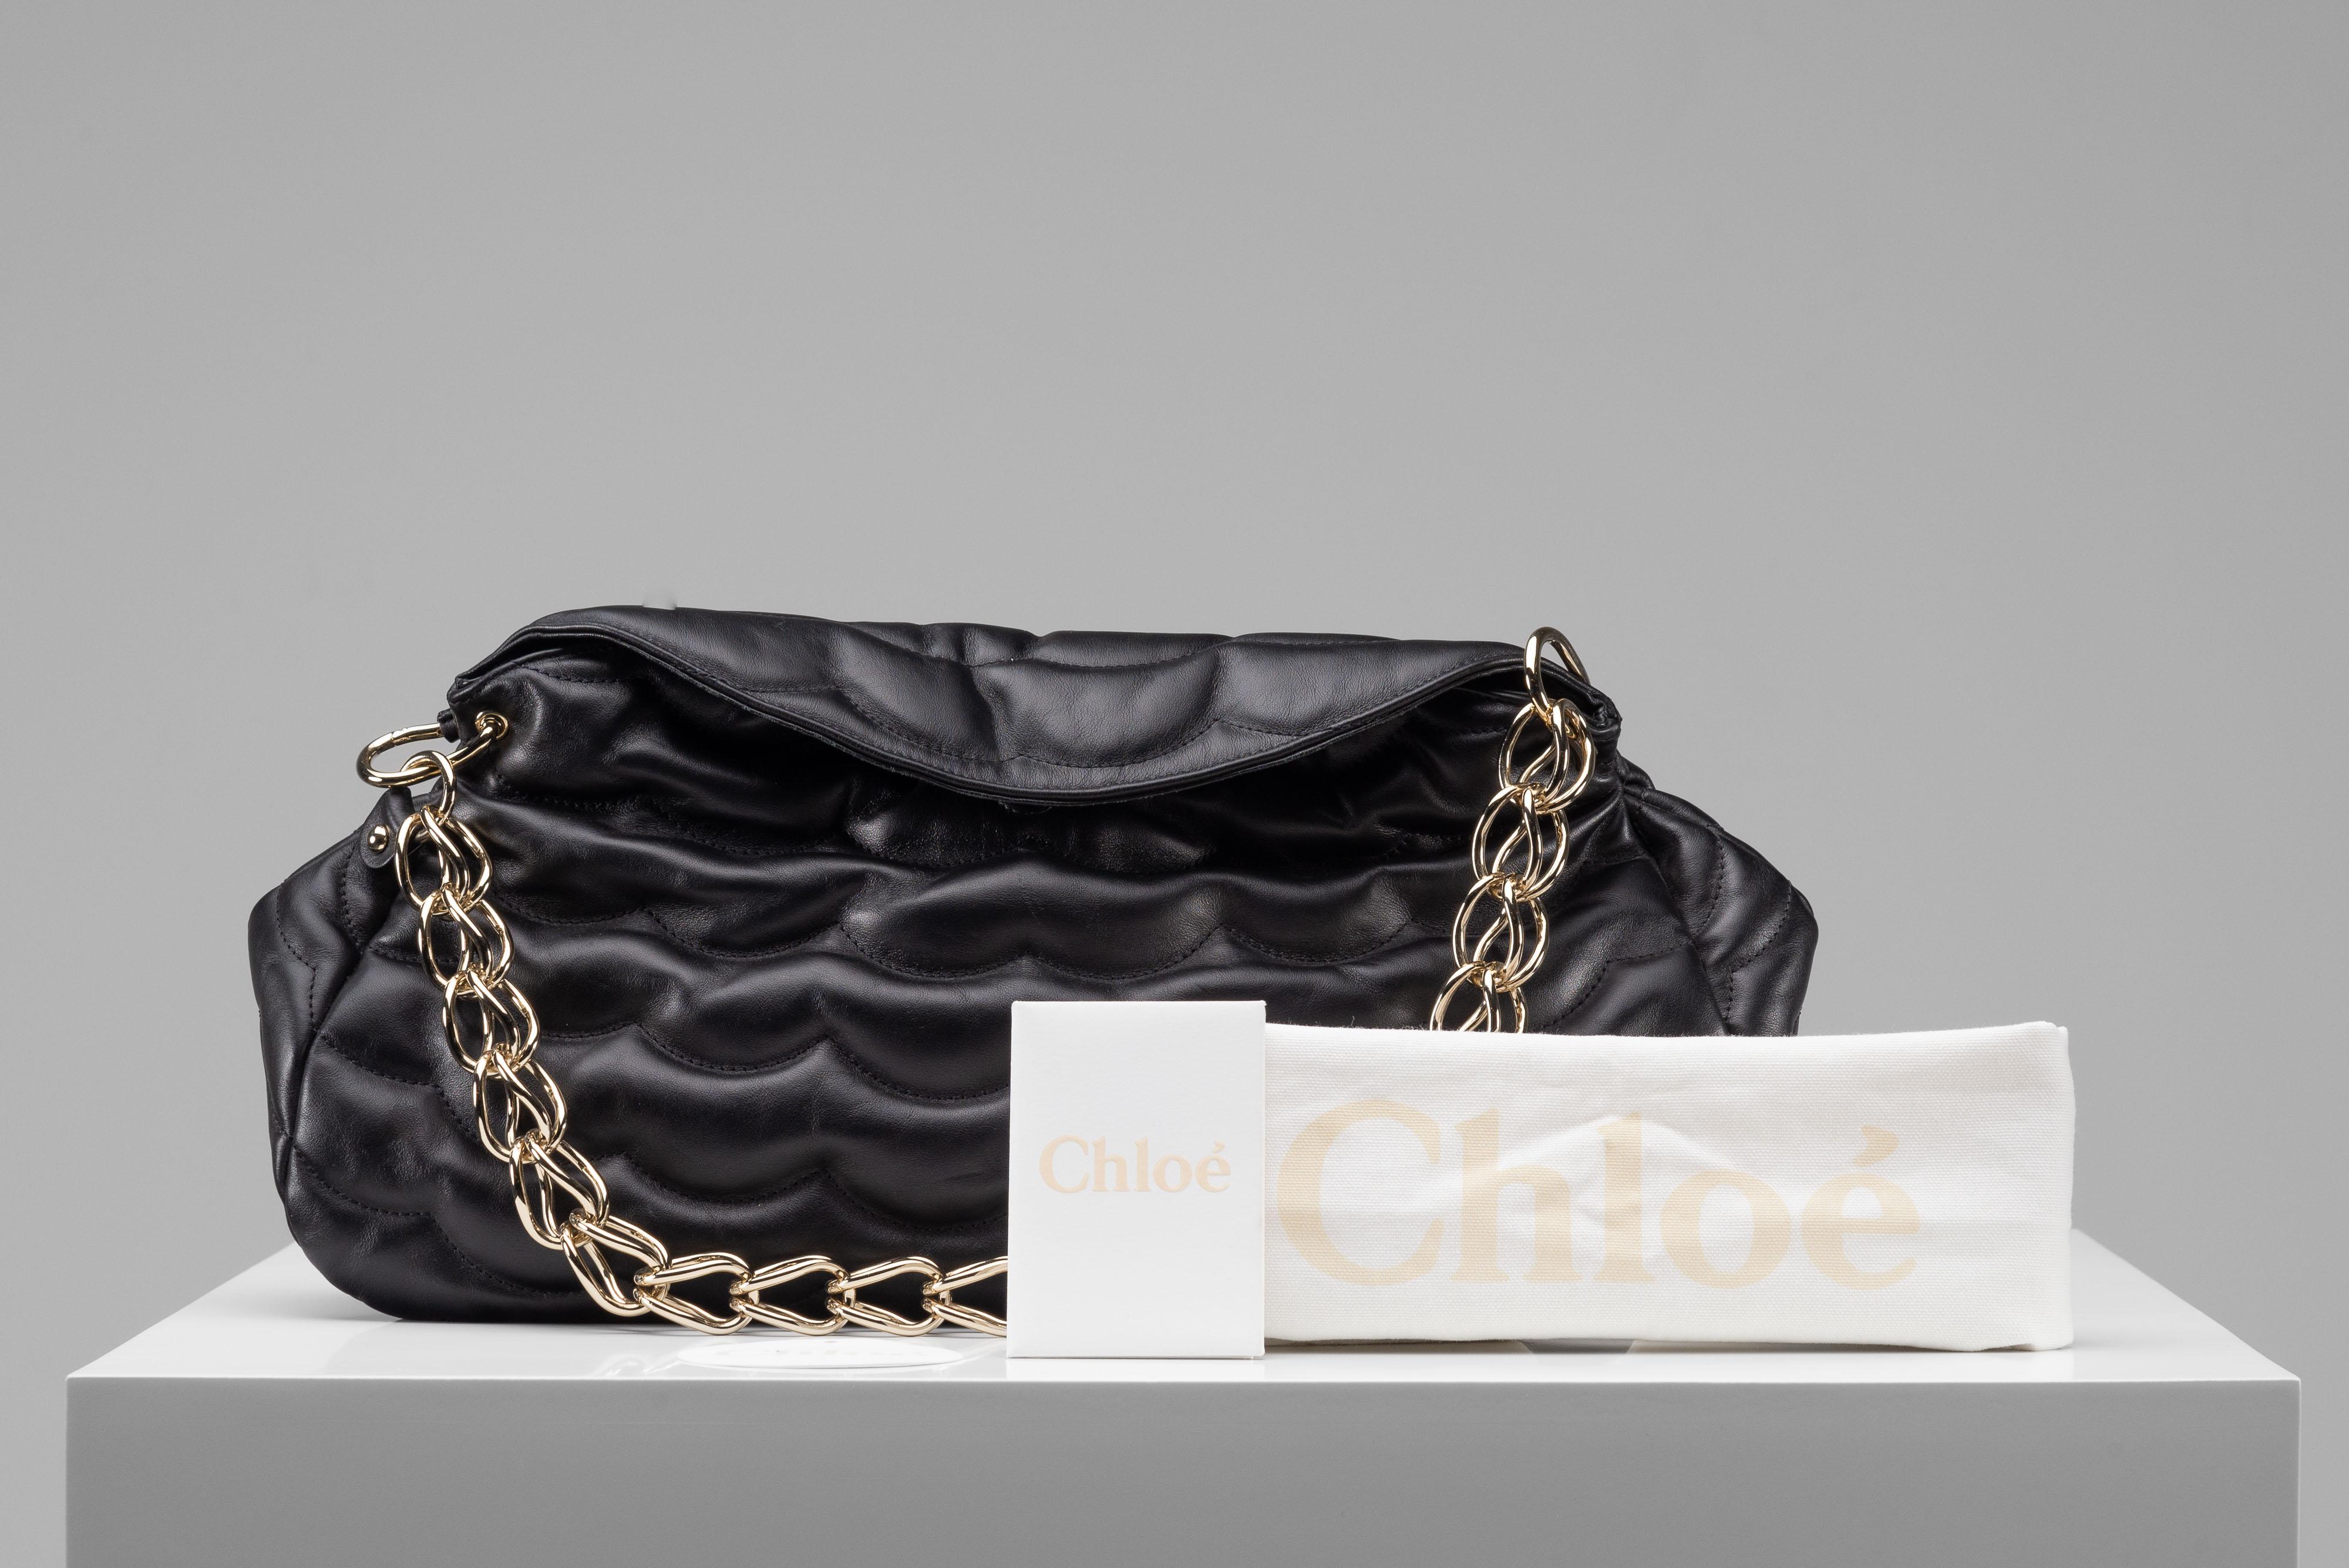 From the collection of SAVINETI we offer this Chloe Juana Black bag:
-    Brand: Chloe 
-    Model: Juana Black Quilted Leather
-    Color: Black
-    Condition: Very Good Condition
-    Materials: leather, gold-color chain
-    Extras: Dustbag &